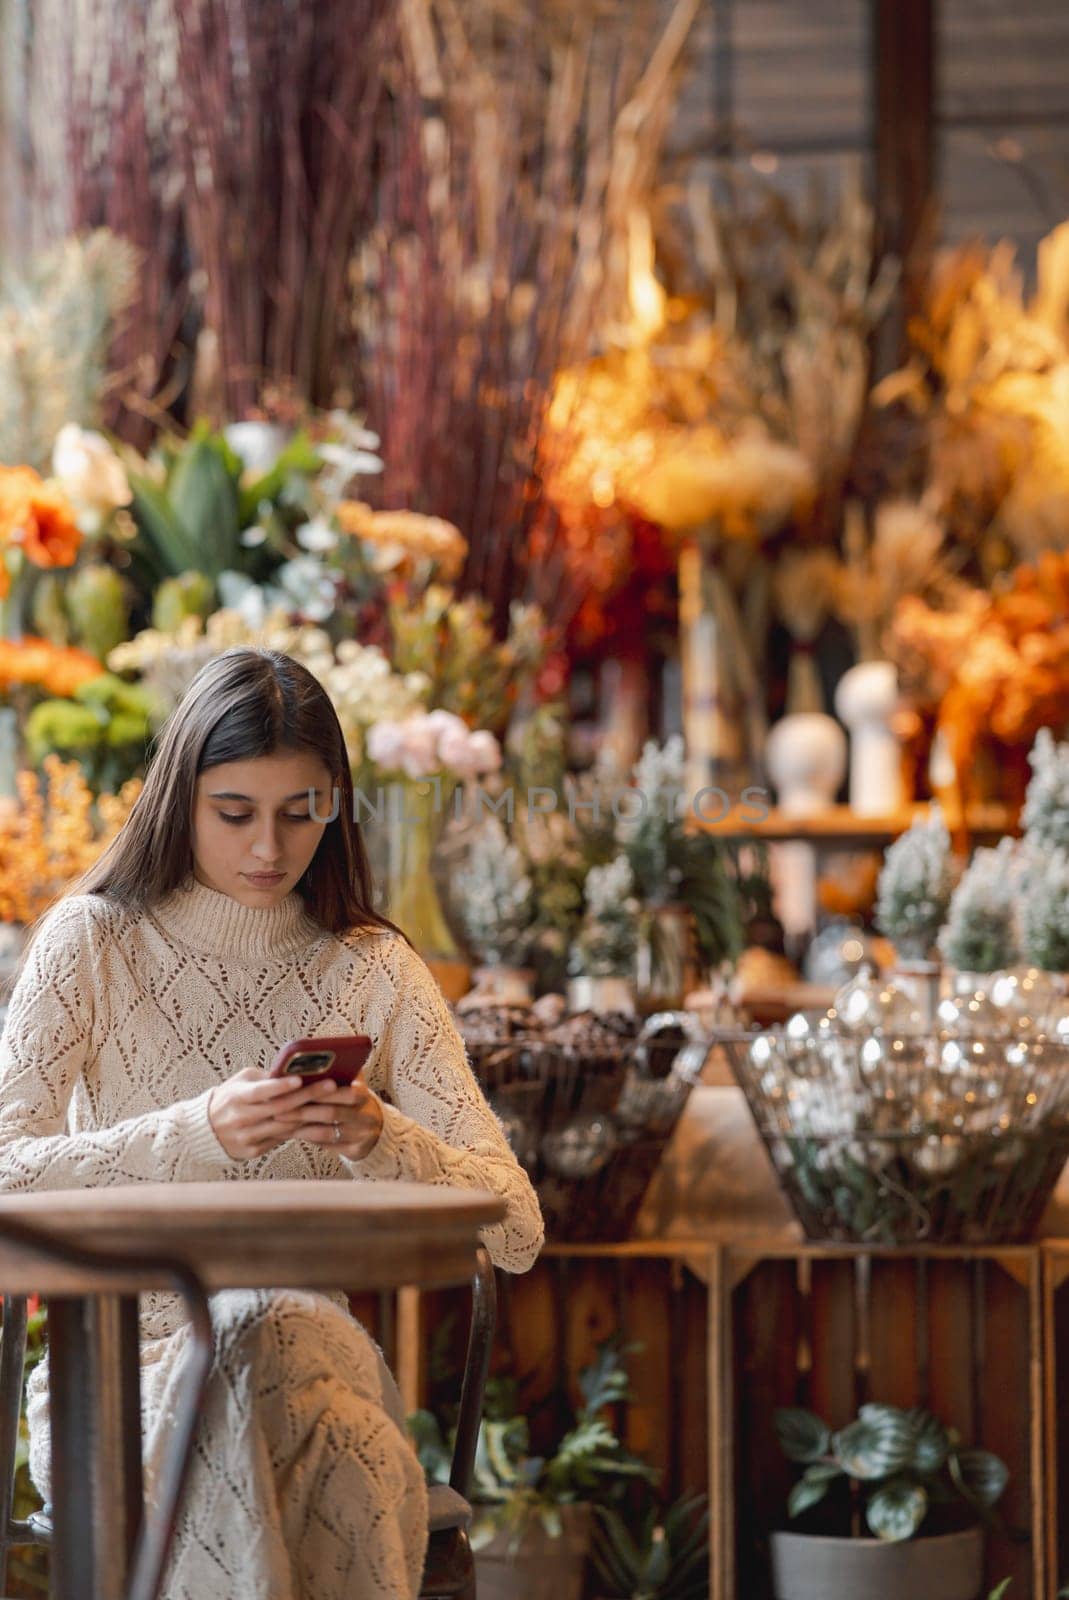 A charming, colorful young lady taking photos of holiday decorations with her smartphone. High quality photo